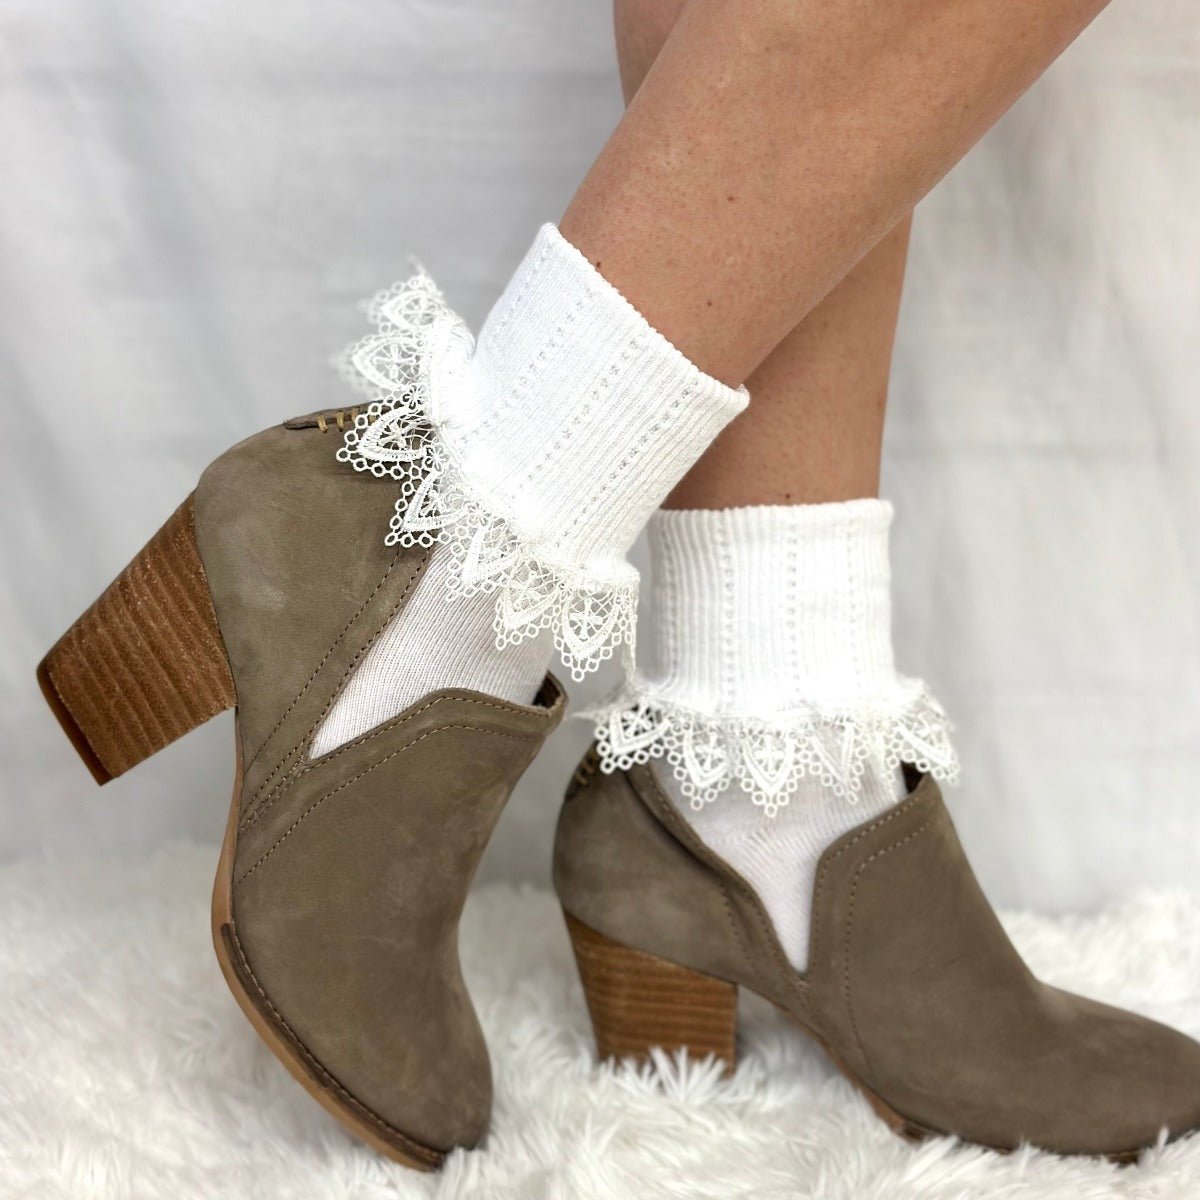 Chantilly  lace ankle cuff socks women - white , socks for booties